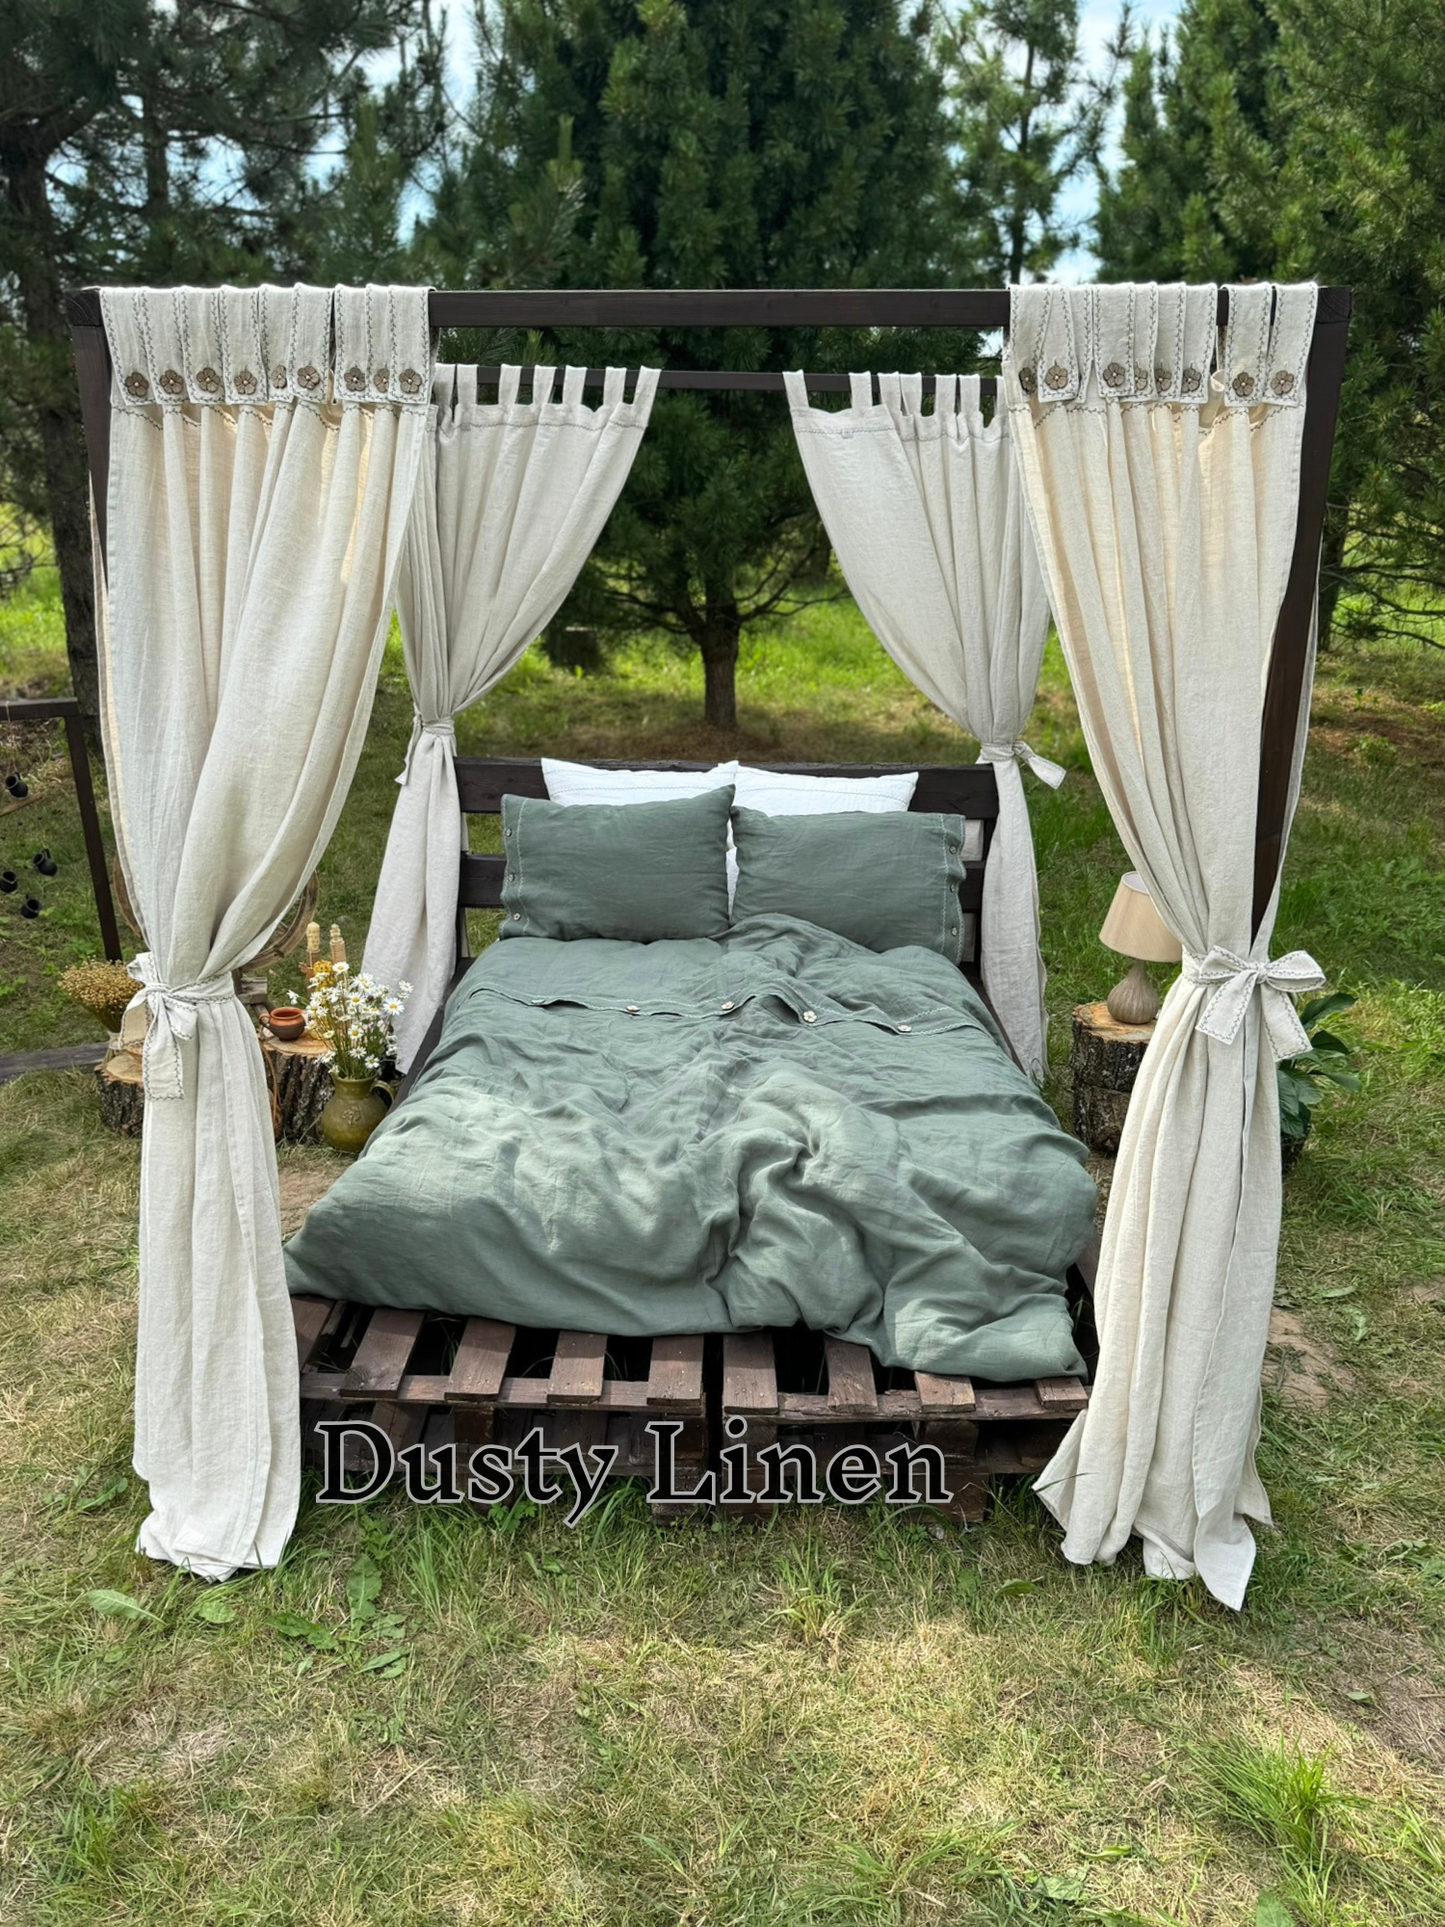 a bed made out of a pallet with a canopy